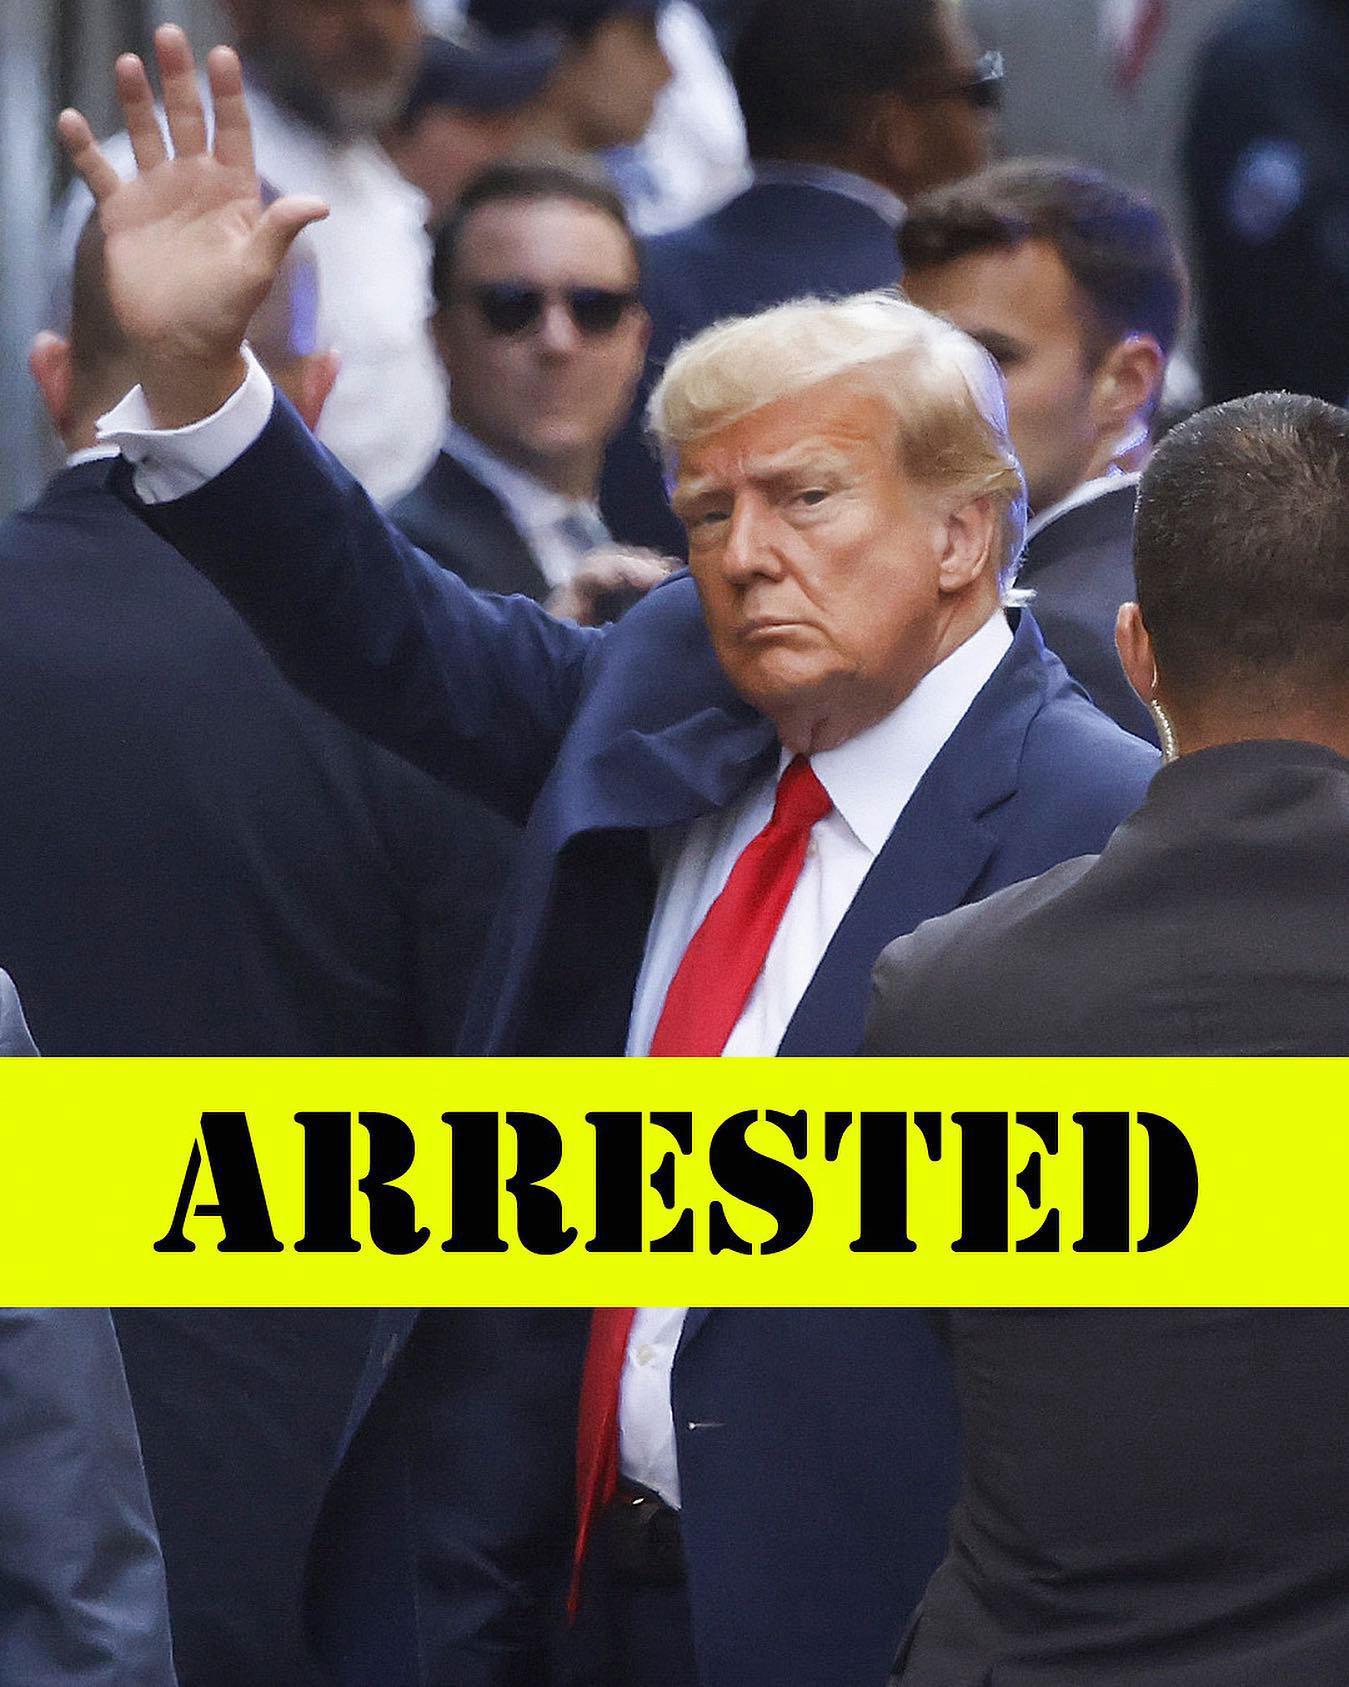 image  1 Donald Trump is officially under arrest, making him the first former president to be charged with a